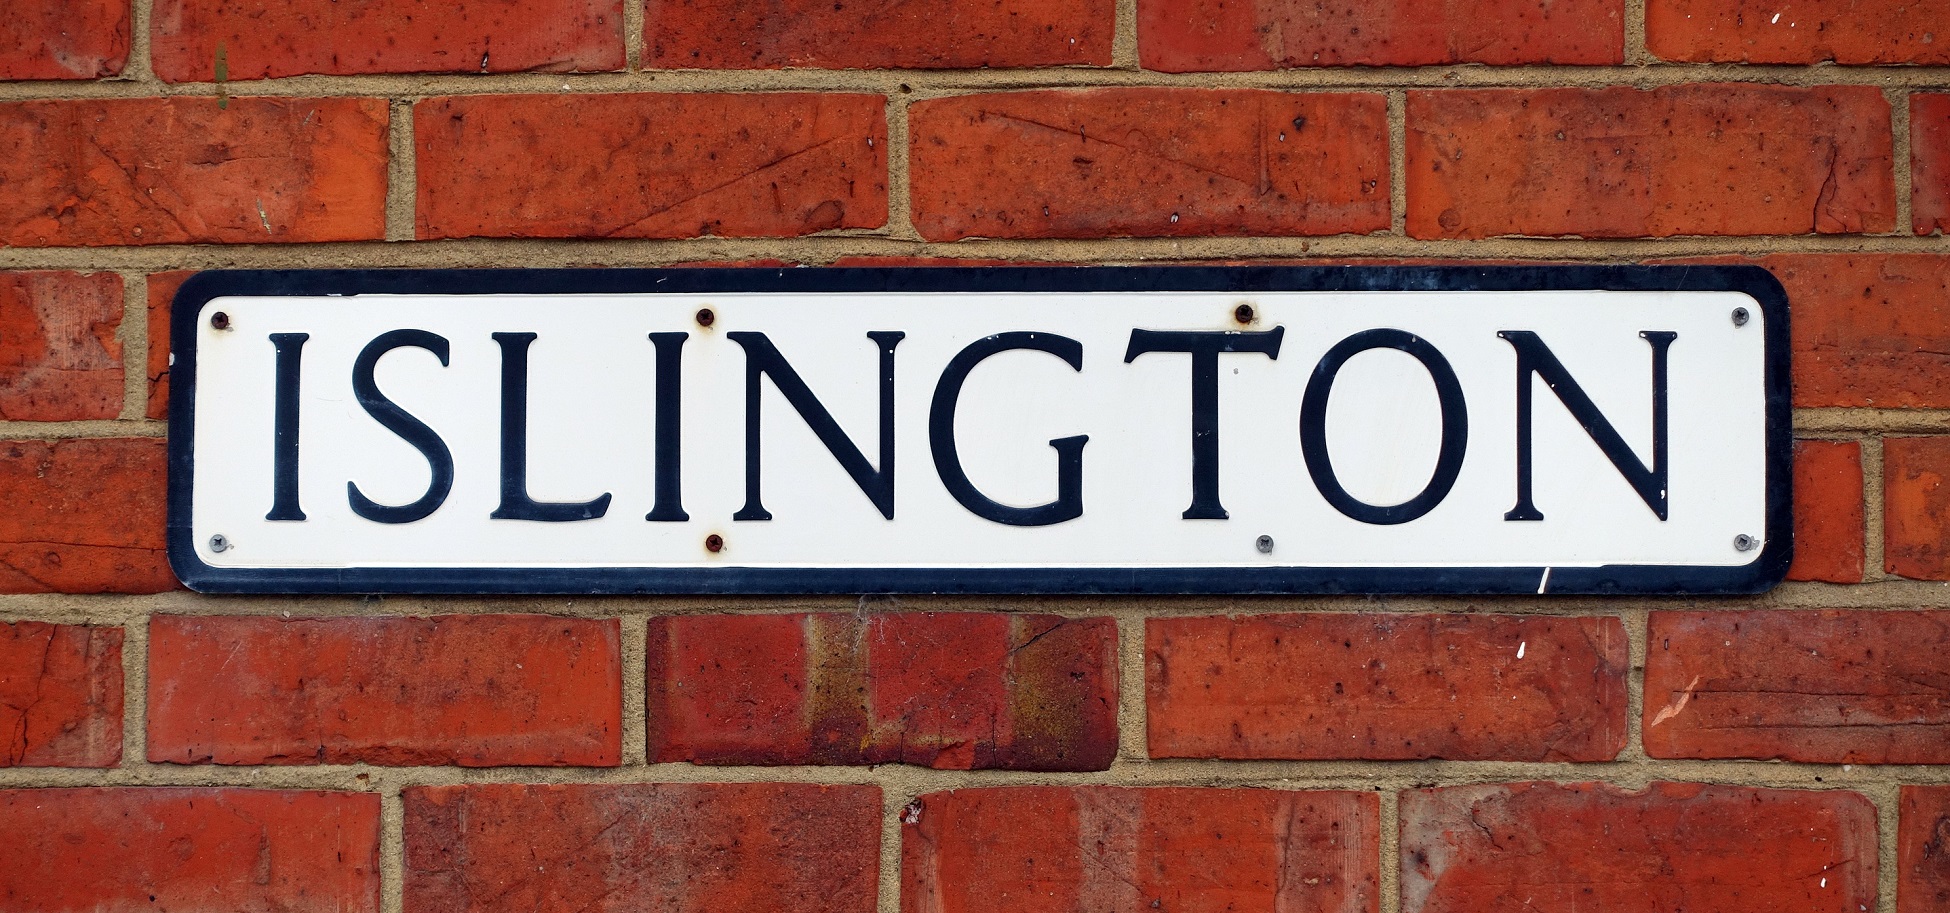 Properties for sale in Islington: Five of the best on the market now